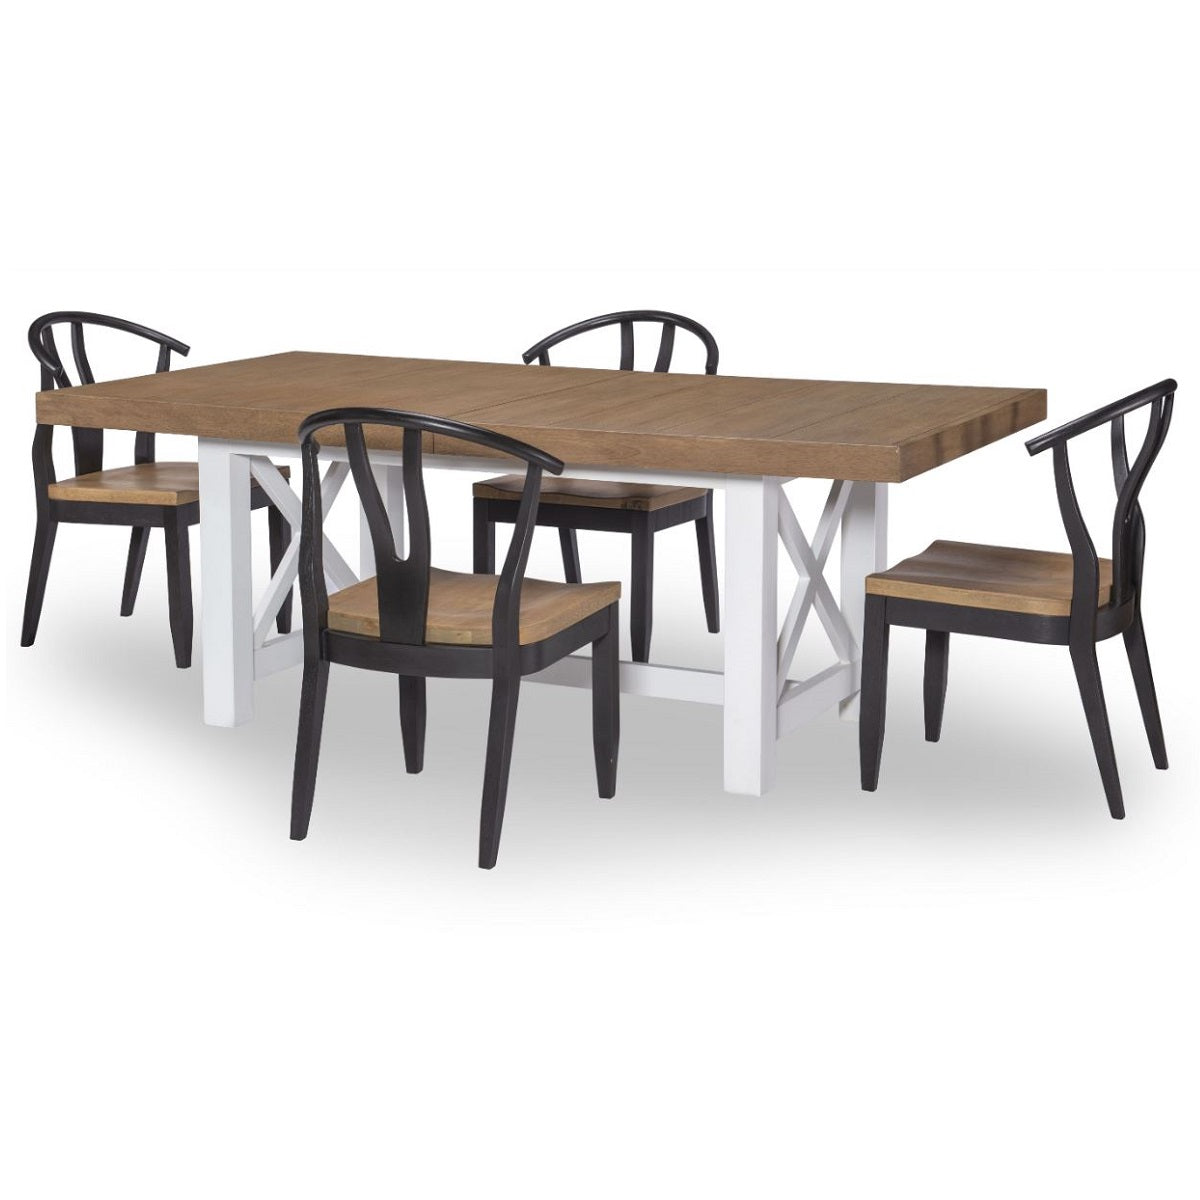 Franklin Dining Set. Harvest oak table top, white veneer painted base with X motif on ends and middle support. Comes with one 18" leaf in matching harvest oak wood. Package includes 4 dining height chairs with harvest oak seats and aged black painted frames. Available in dining and counter height.